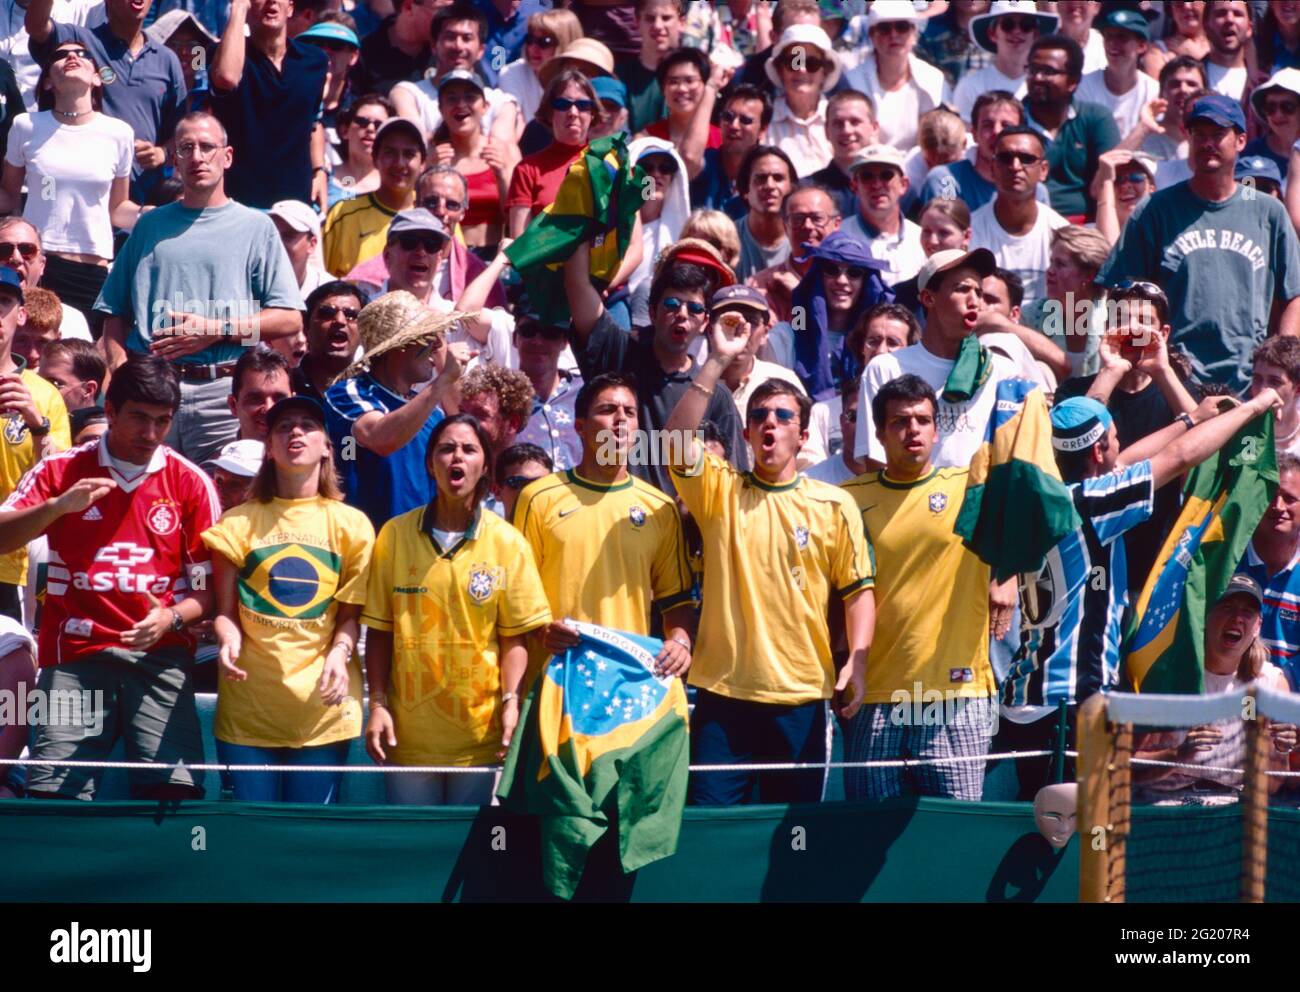 Brazilian supporters of the tennis team watching the match, 2000s Stock Photo